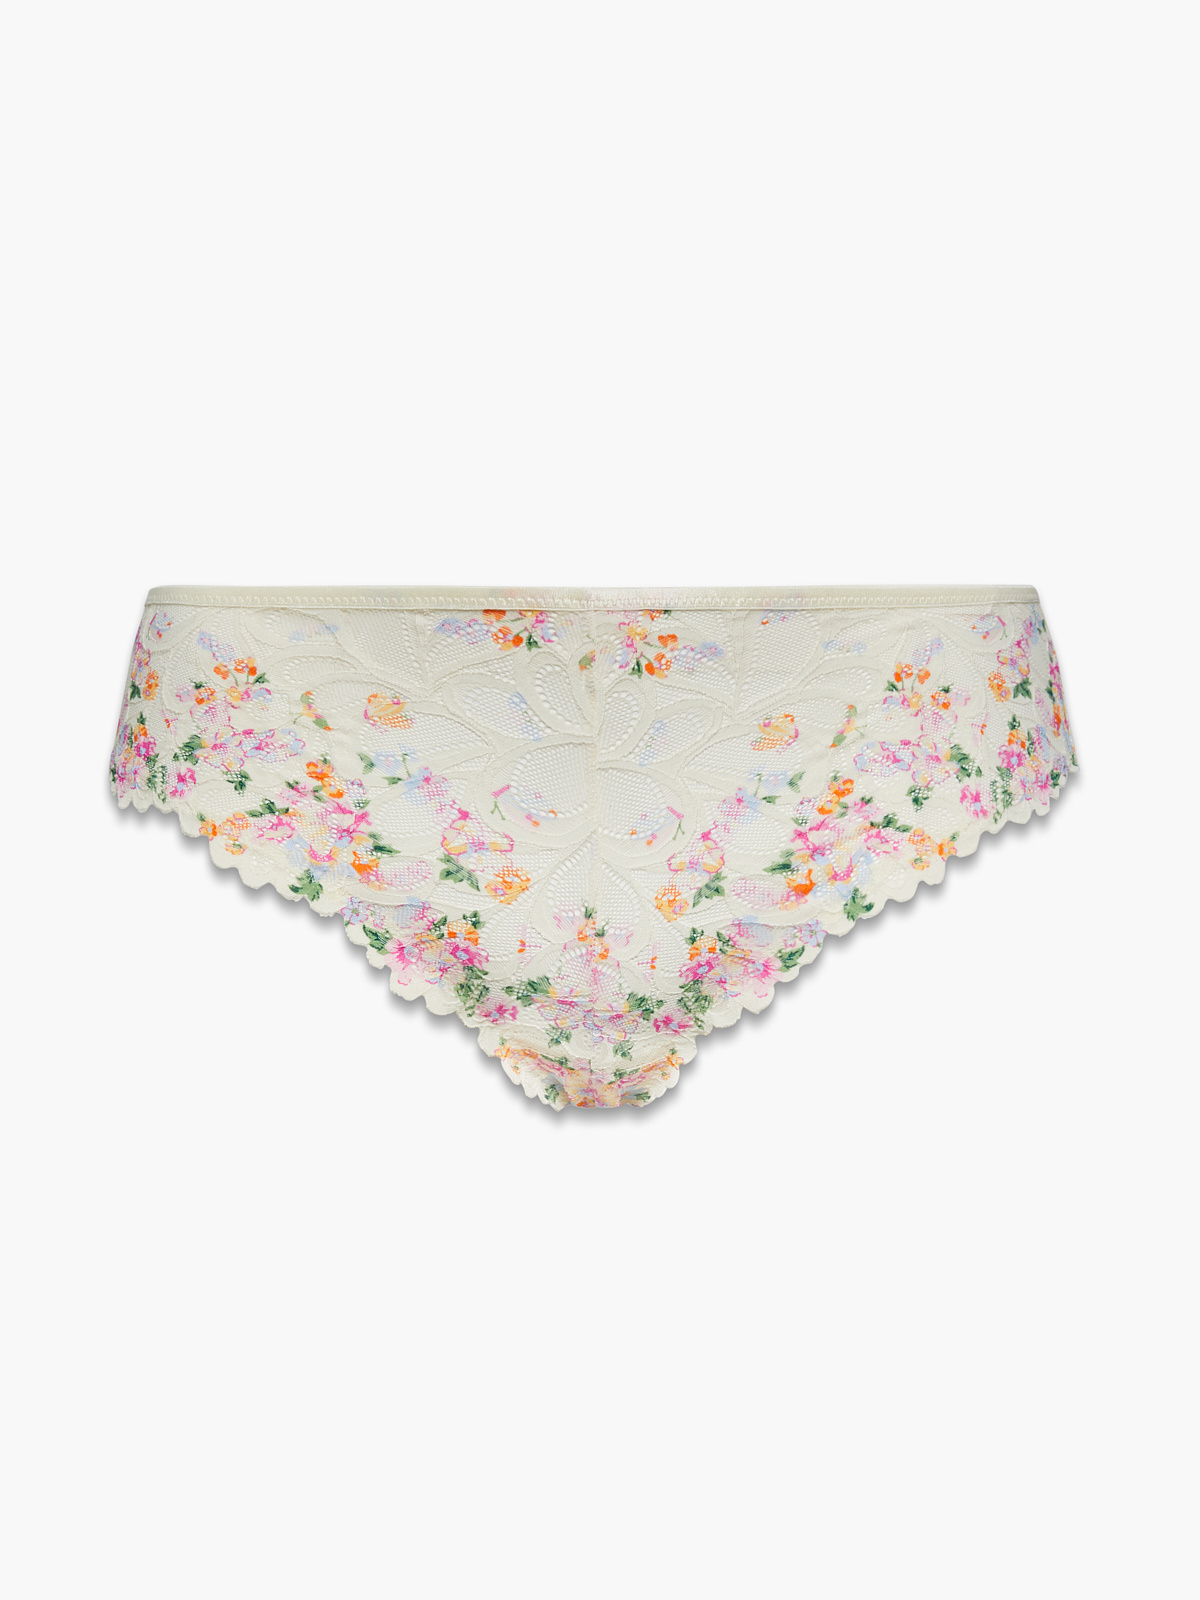 Savage Not Sorry Lace Cheeky Panty in Multi & White | SAVAGE X FENTY